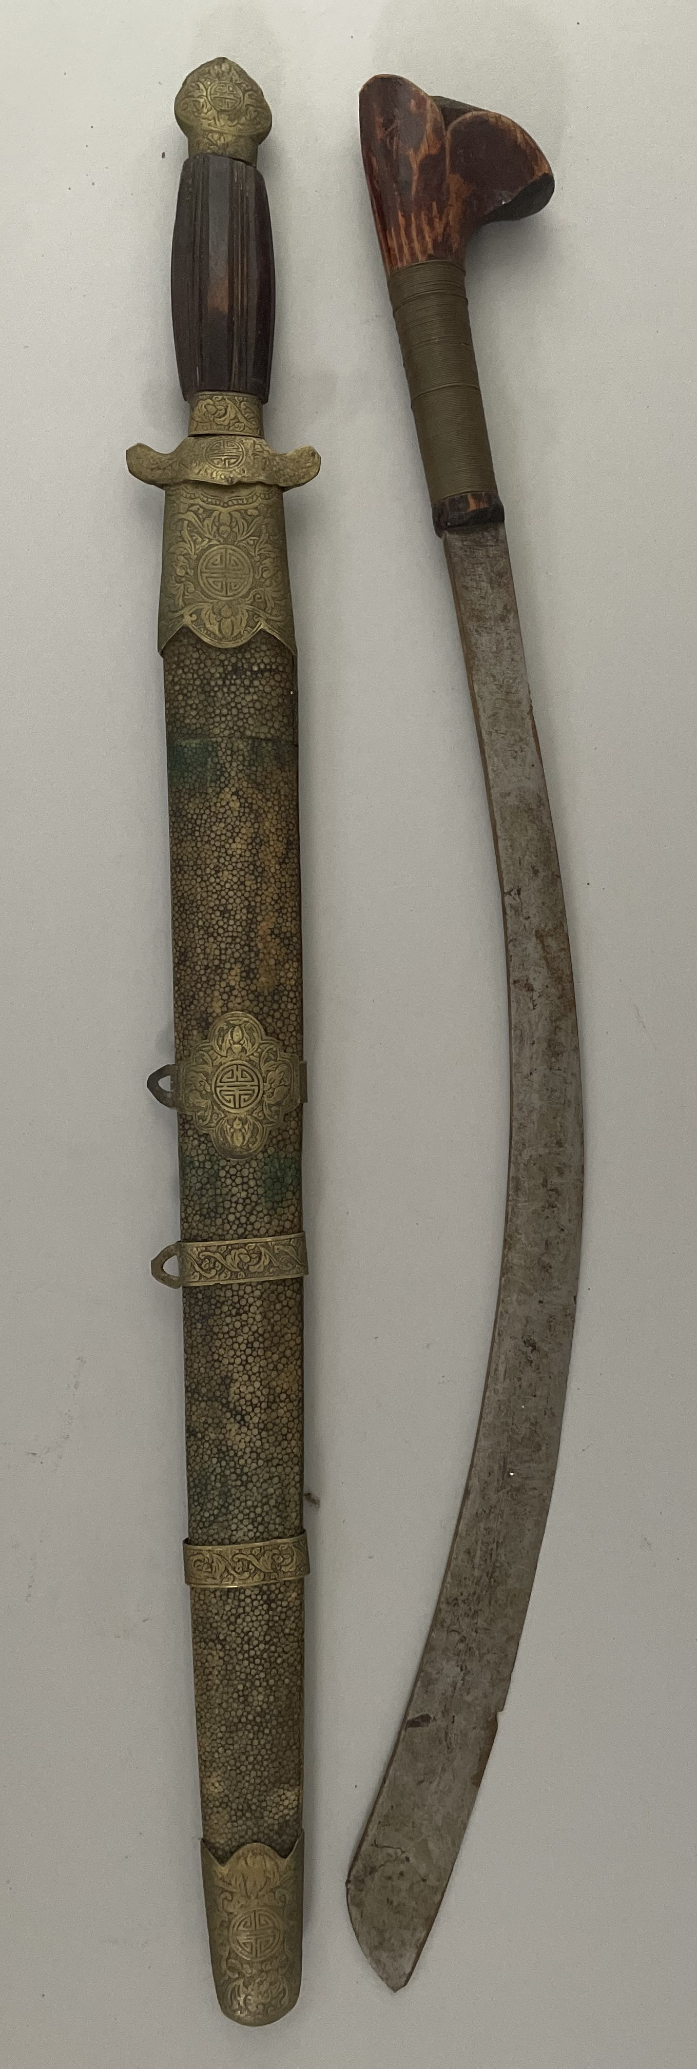 A CHINESE SWORD (DAO) AND THREE MALAYSIAN DAGGERS, LATE 19TH/EARLY 20TH CENTURY